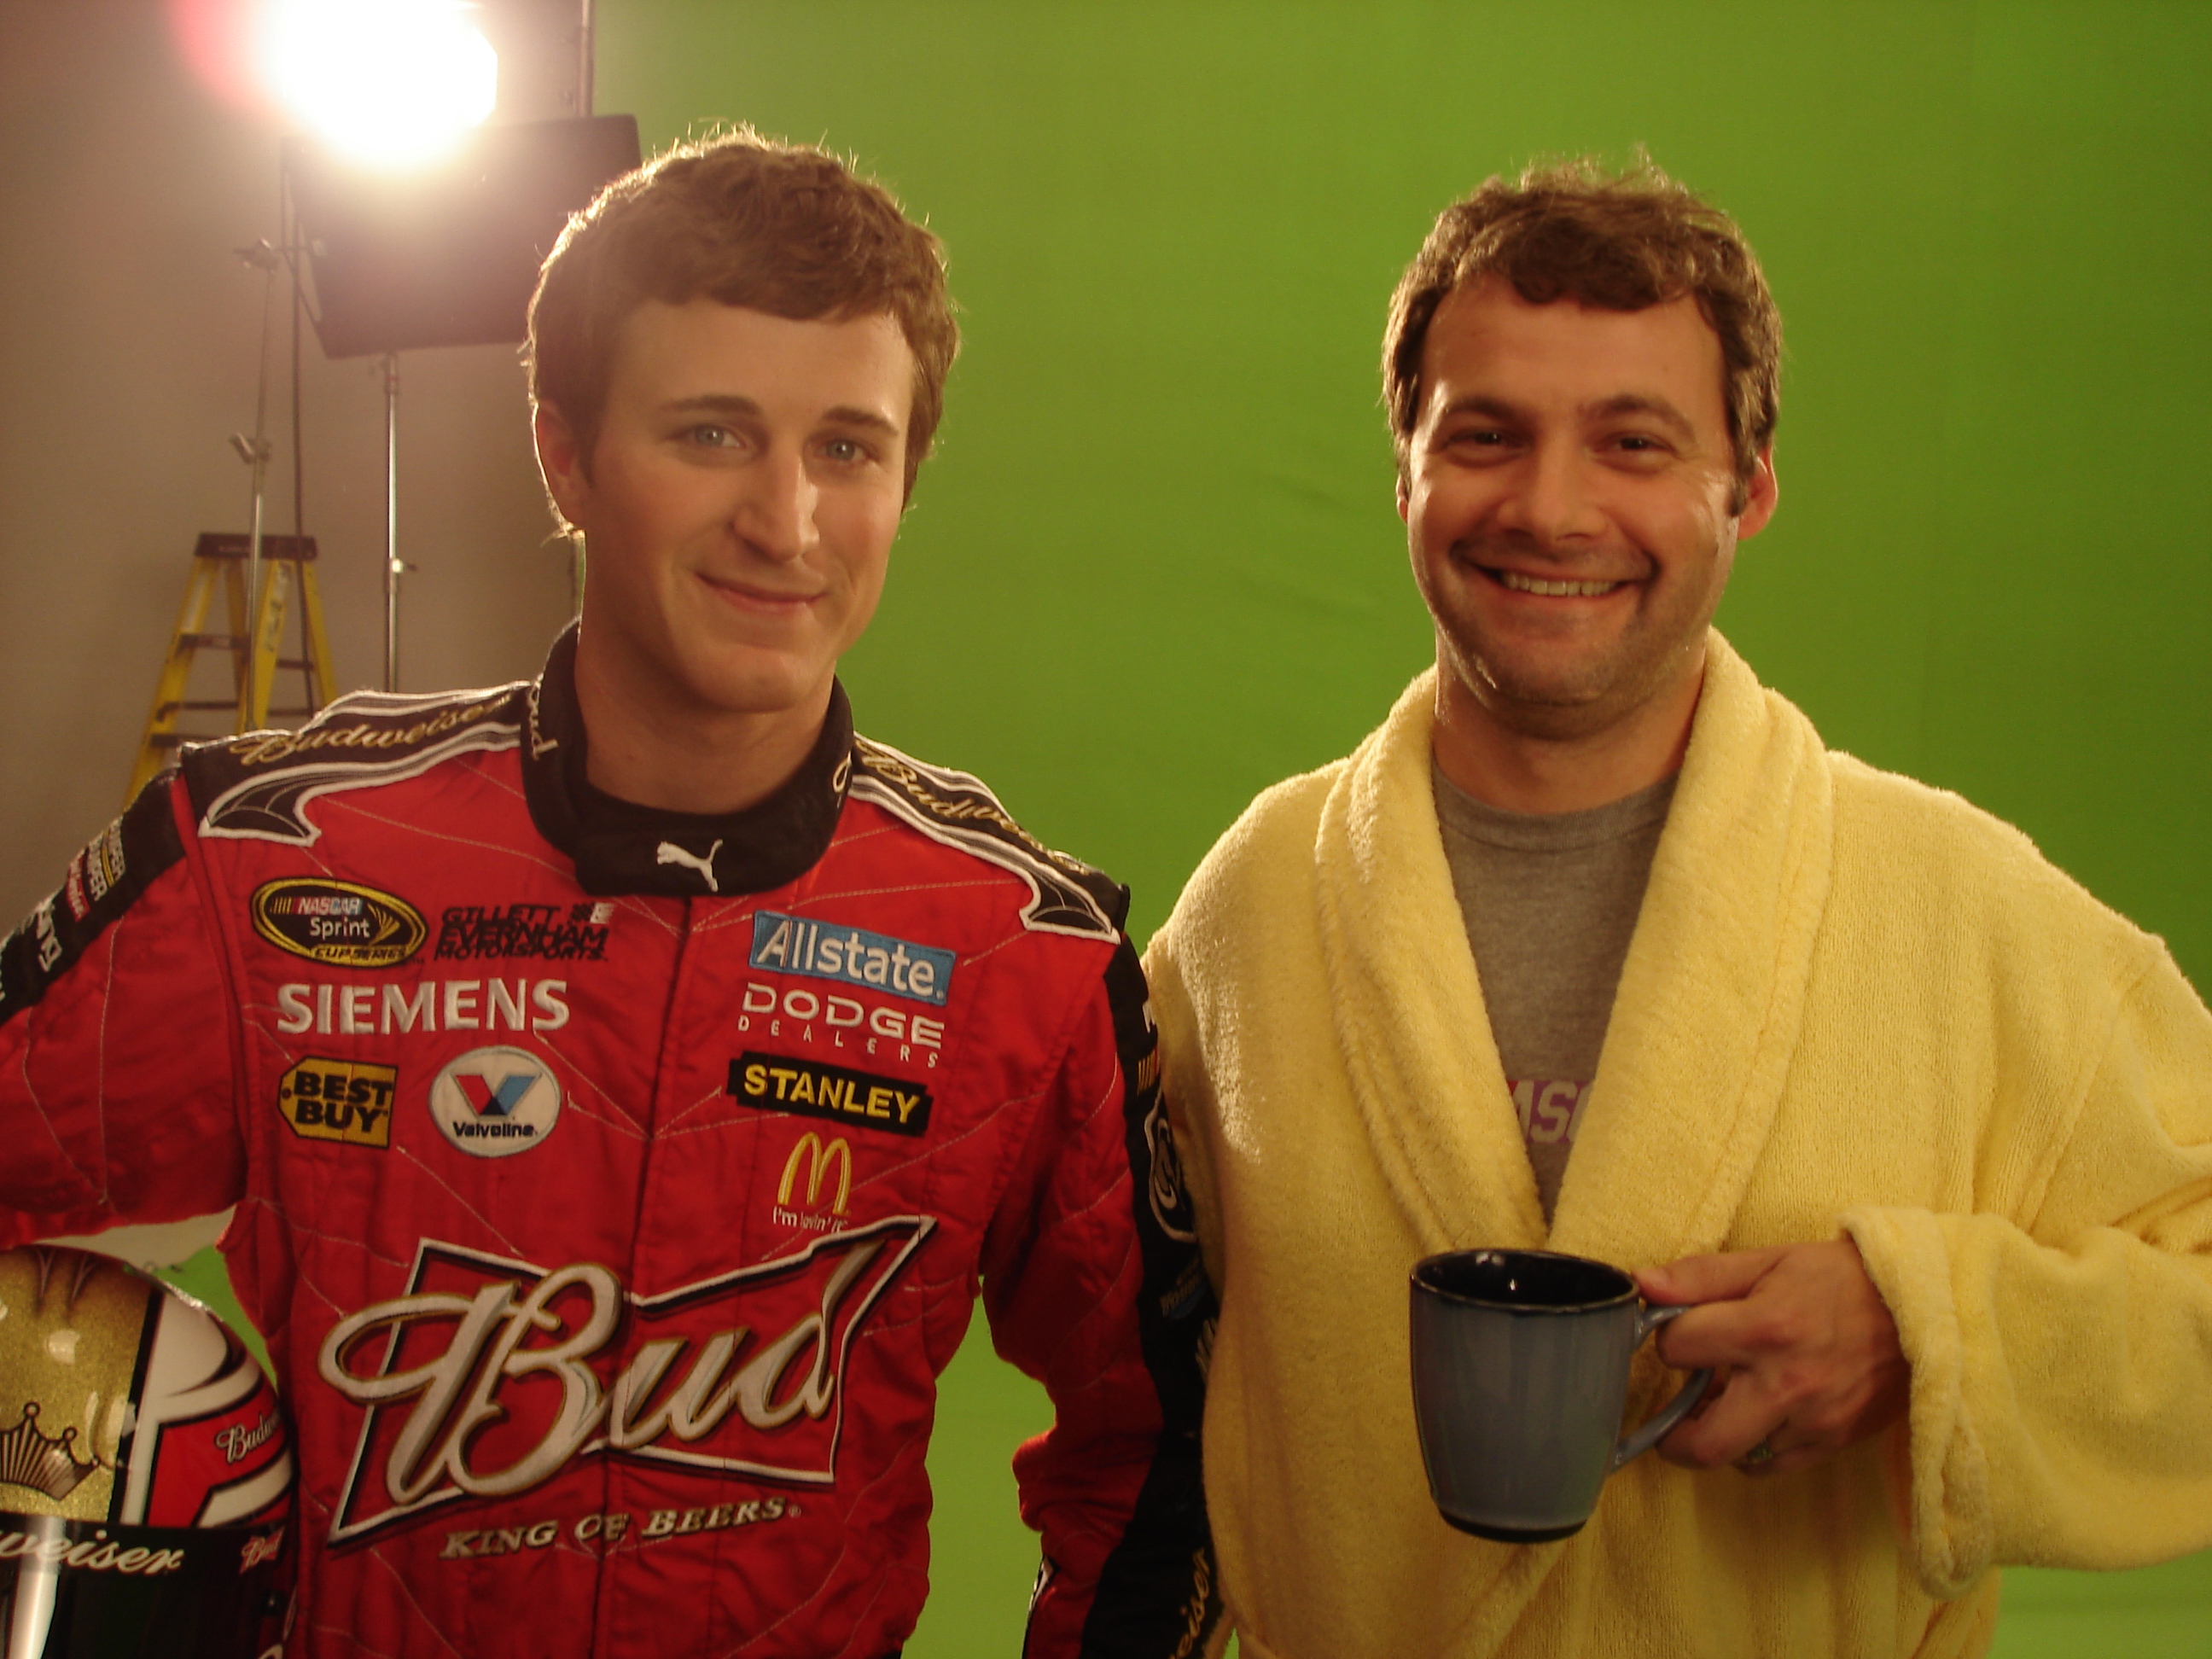 NASCAR Commercial with Kasey Kahne